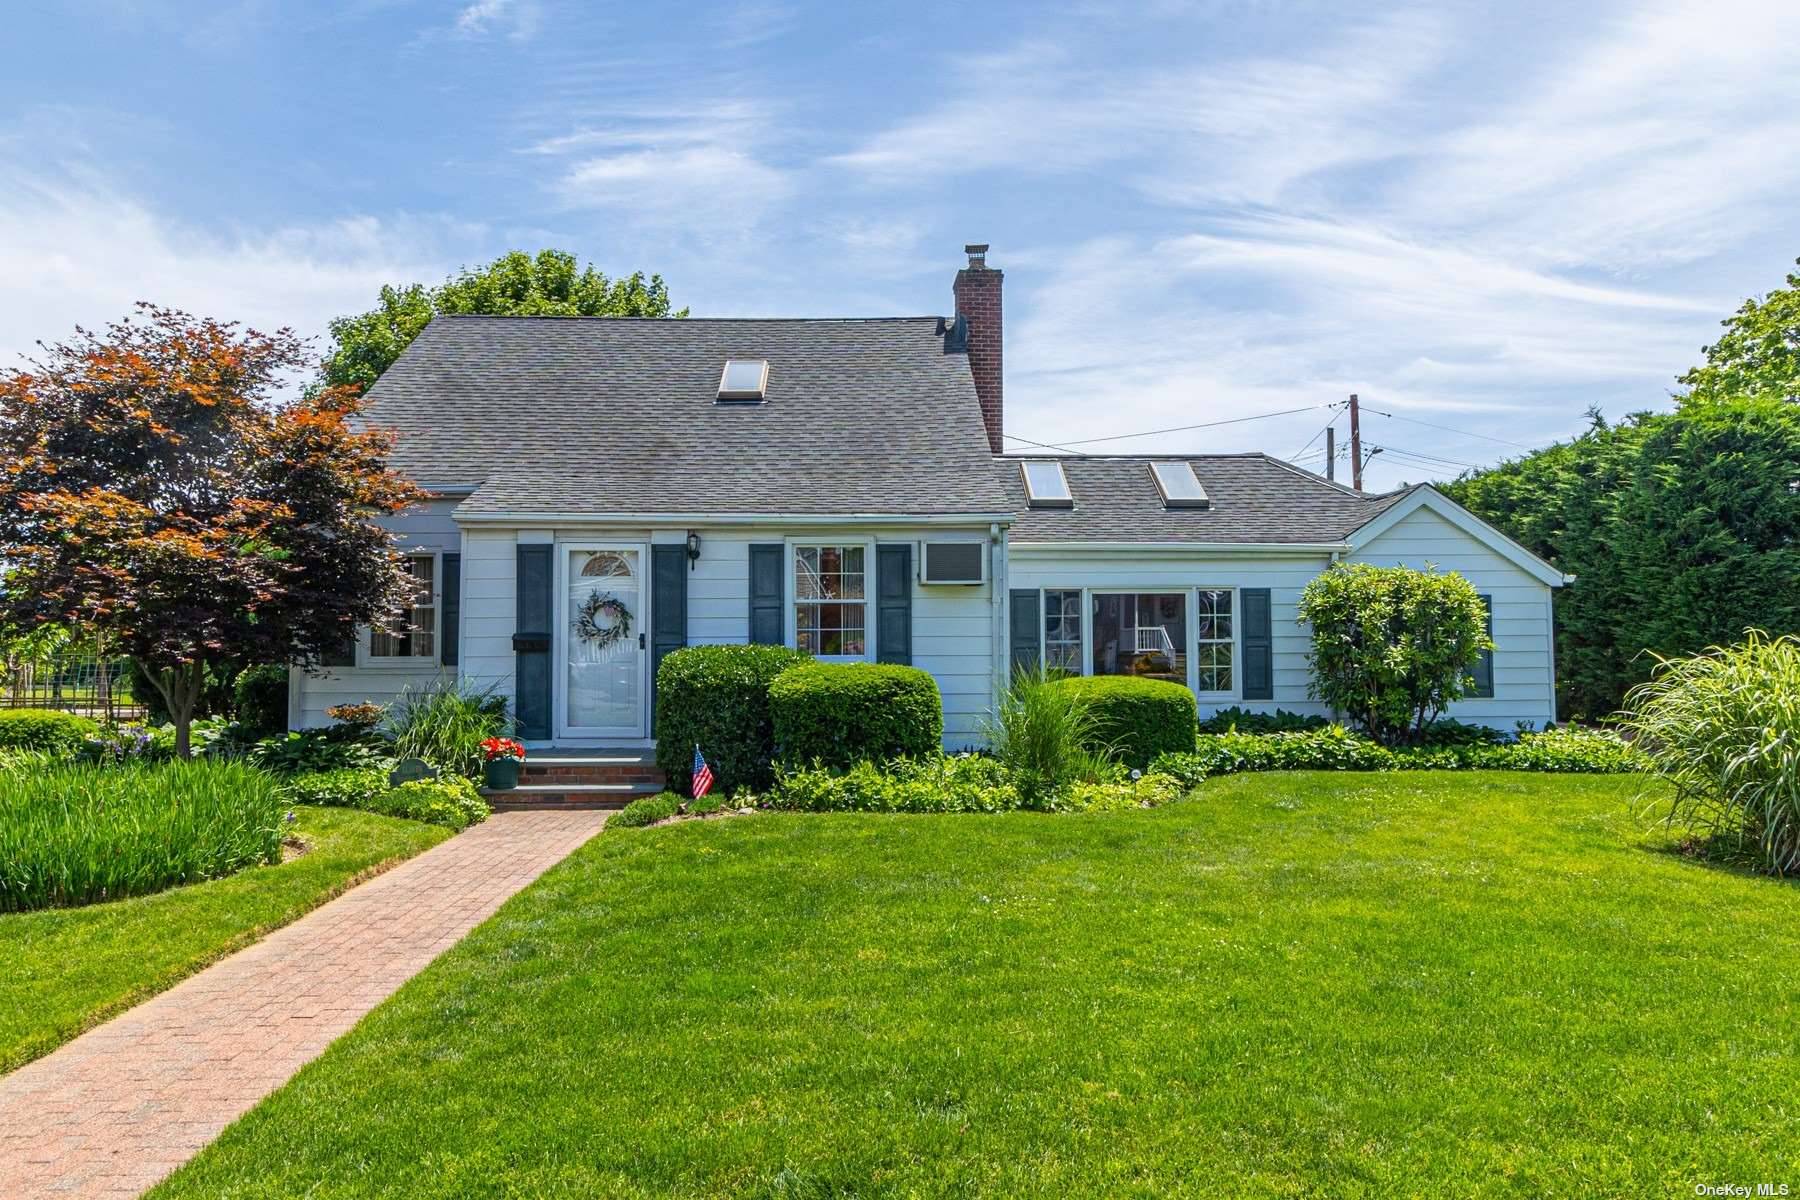 Meticulously maintained 4 bedroom 2 bathroom Cape located on a quiet and serene block in the Village of East Rockaway and in the award winning Lynbrook school district !